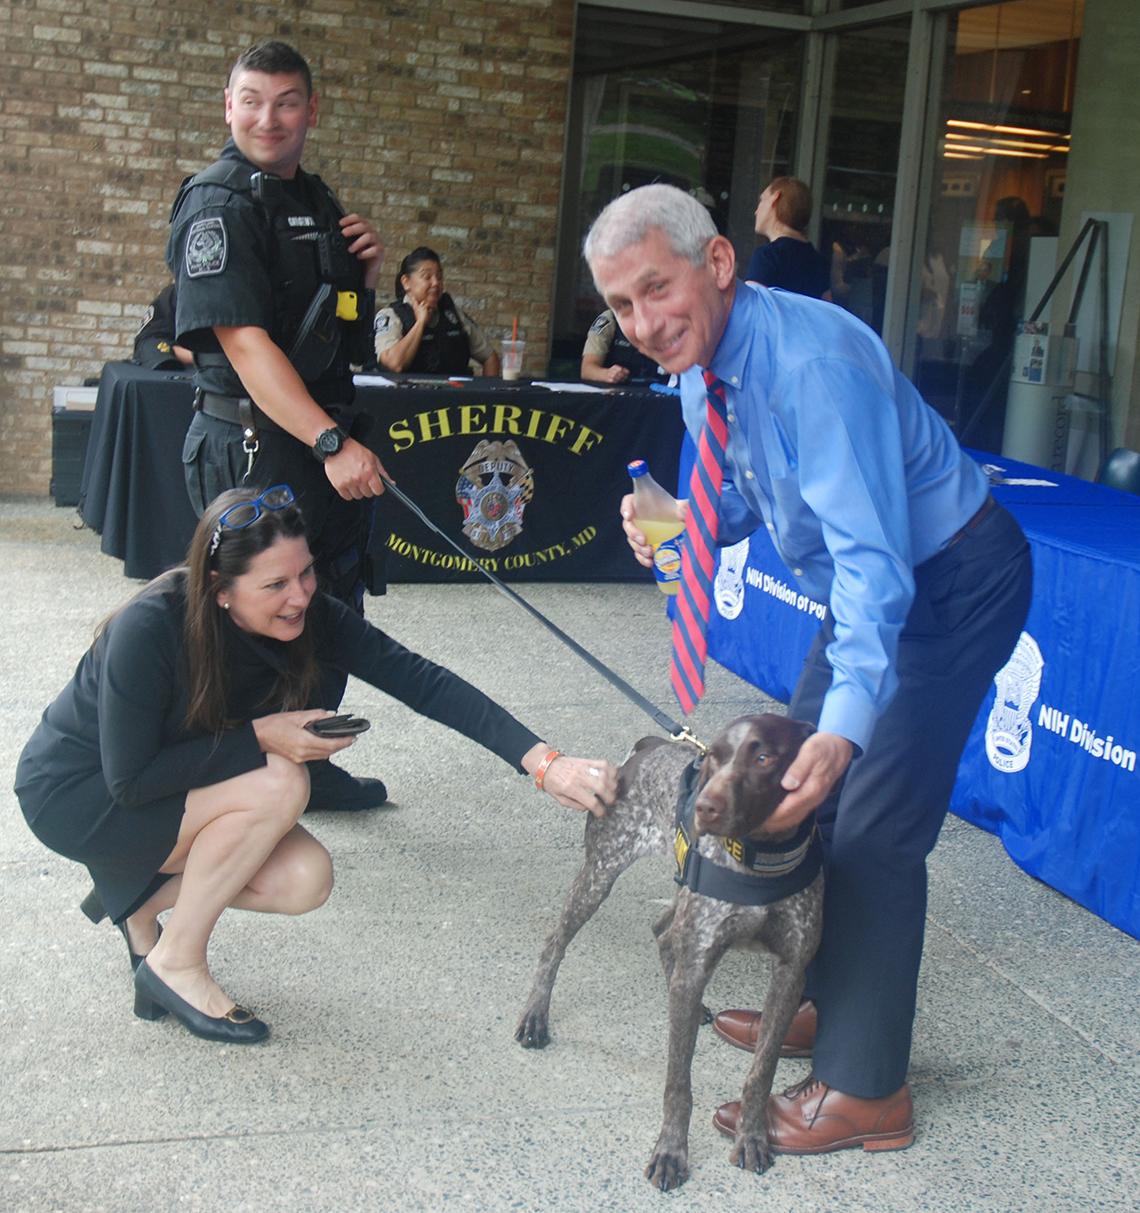 Peter Girgenti of Montgomery County Park Police, with Xena and Dr. Anthony Fauci.